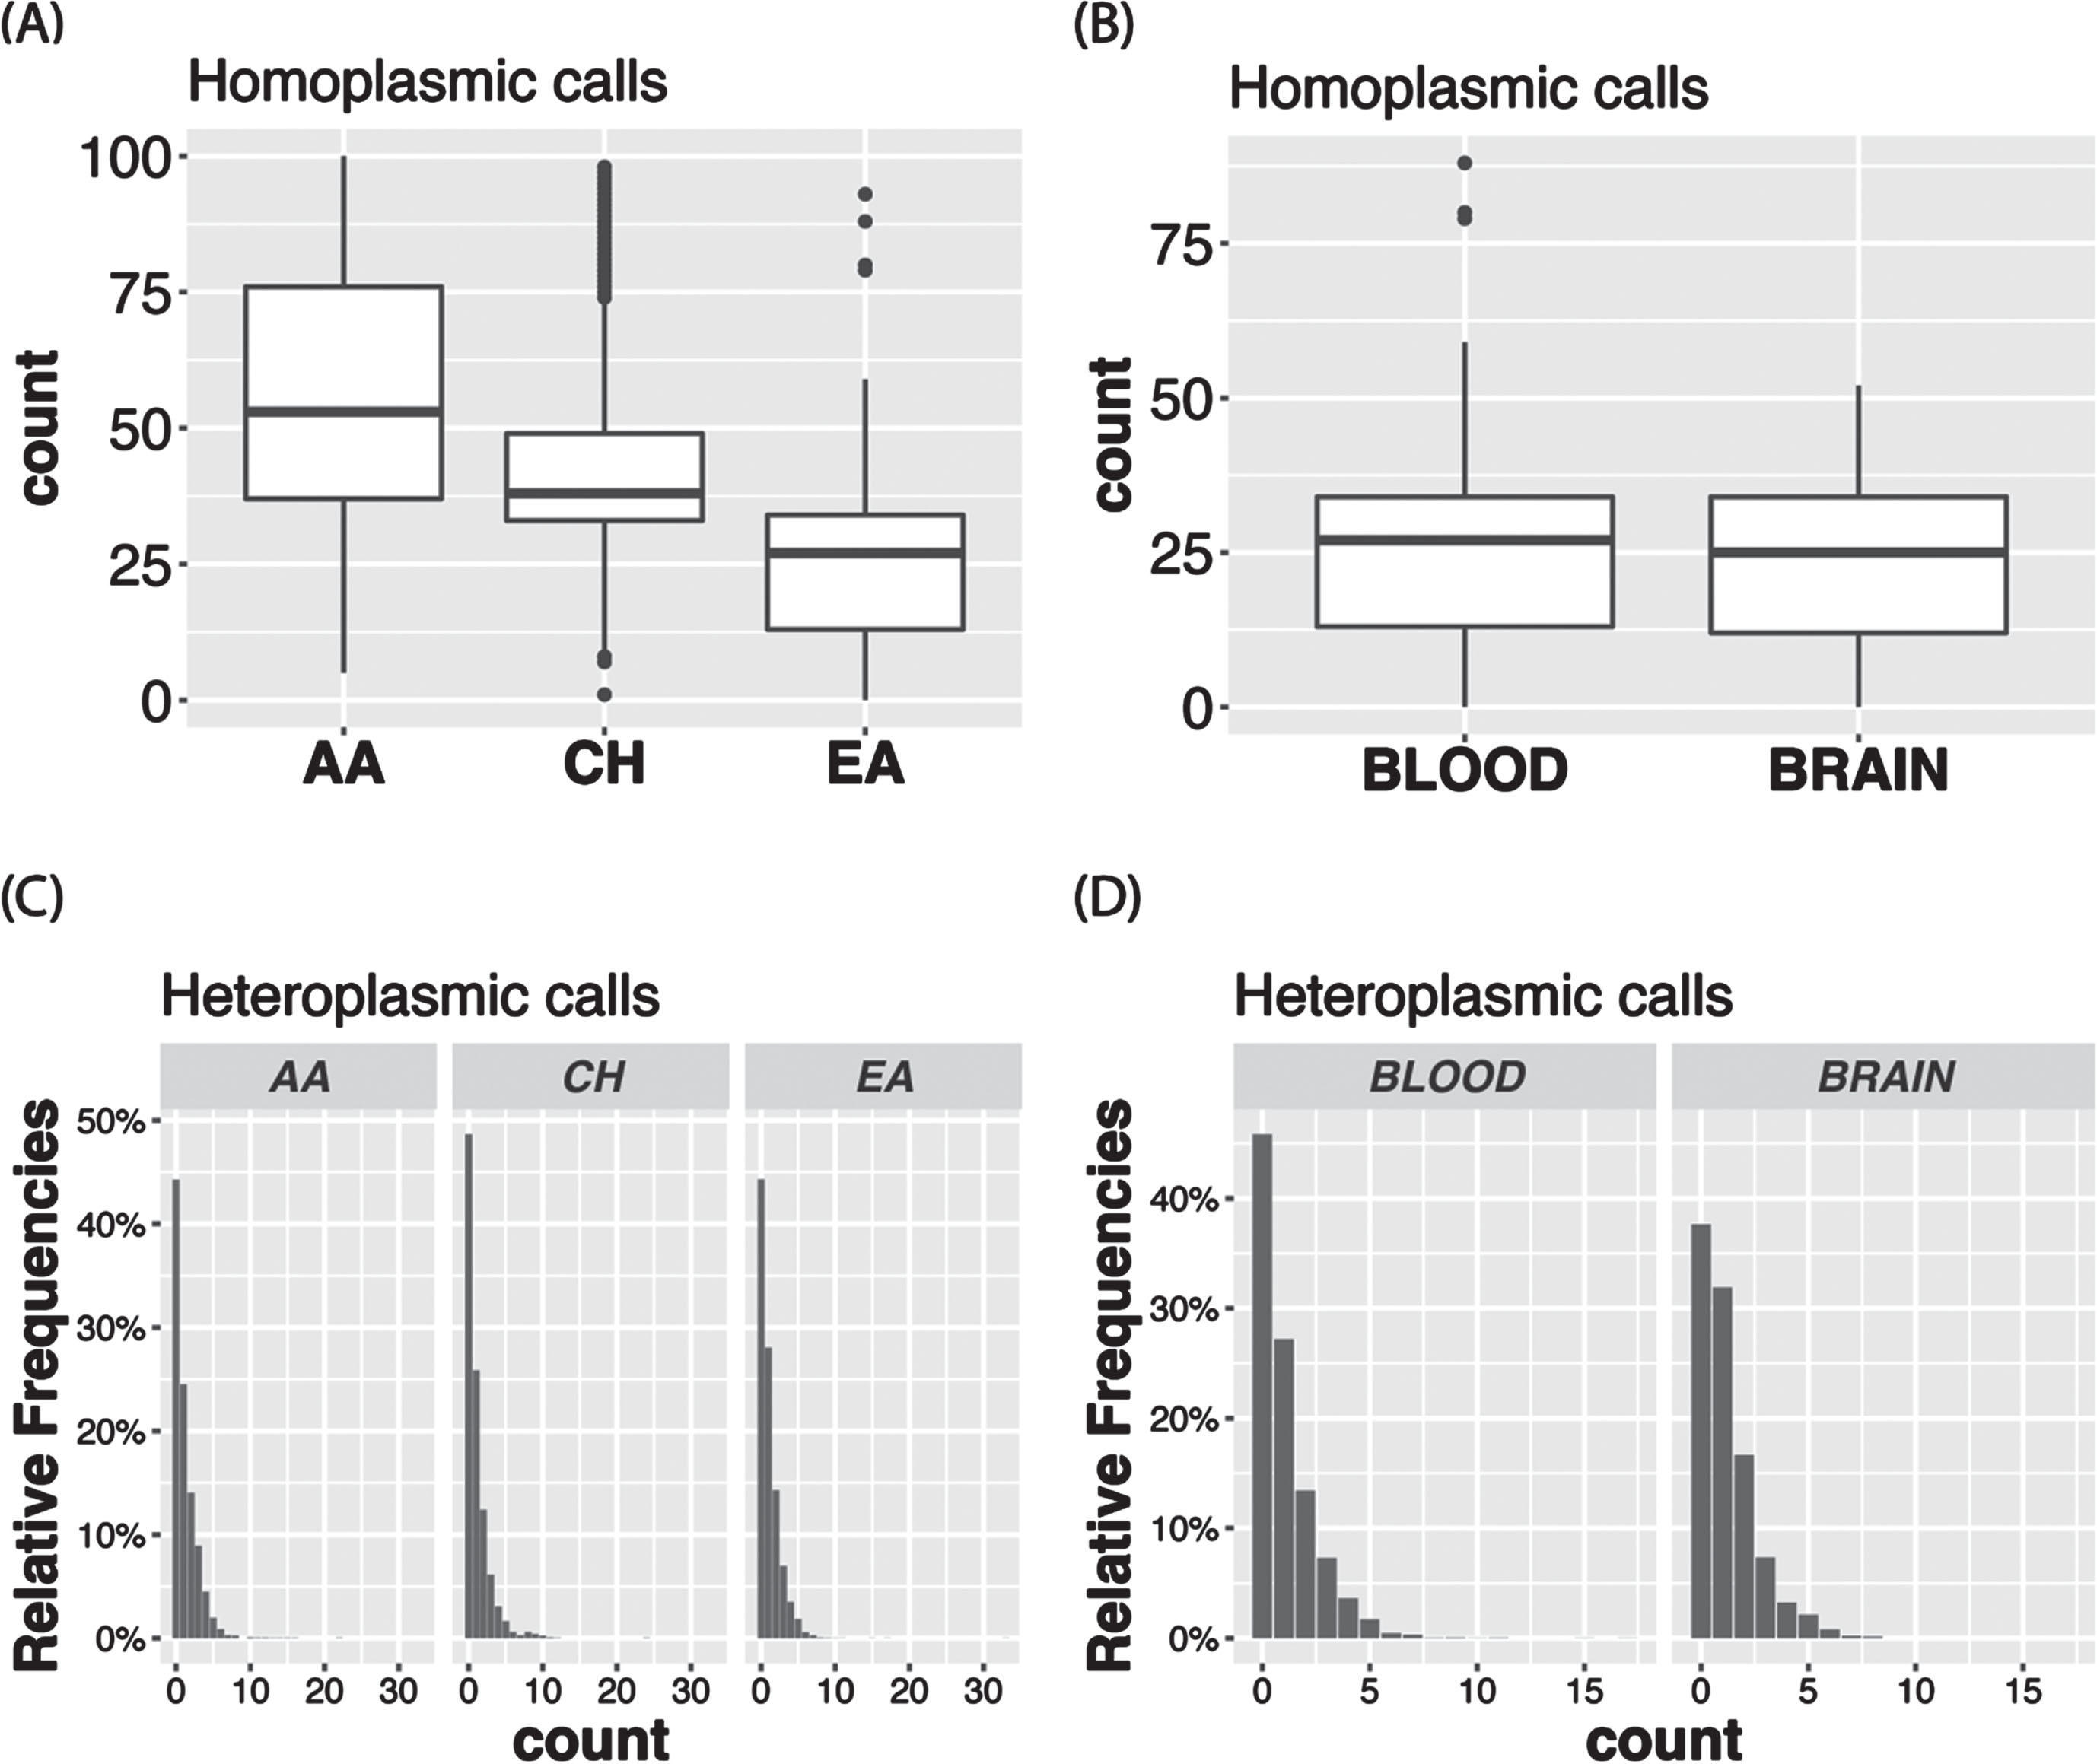 Boxplots showing the mean number of homoplasmic calls according to (A) ancestry group and (B) tissue type among European ancestry individuals. Bar plots show the proportion of heteroplasmic calls according to (C) ancestry group and (D) tissue type among European ancestry individuals.